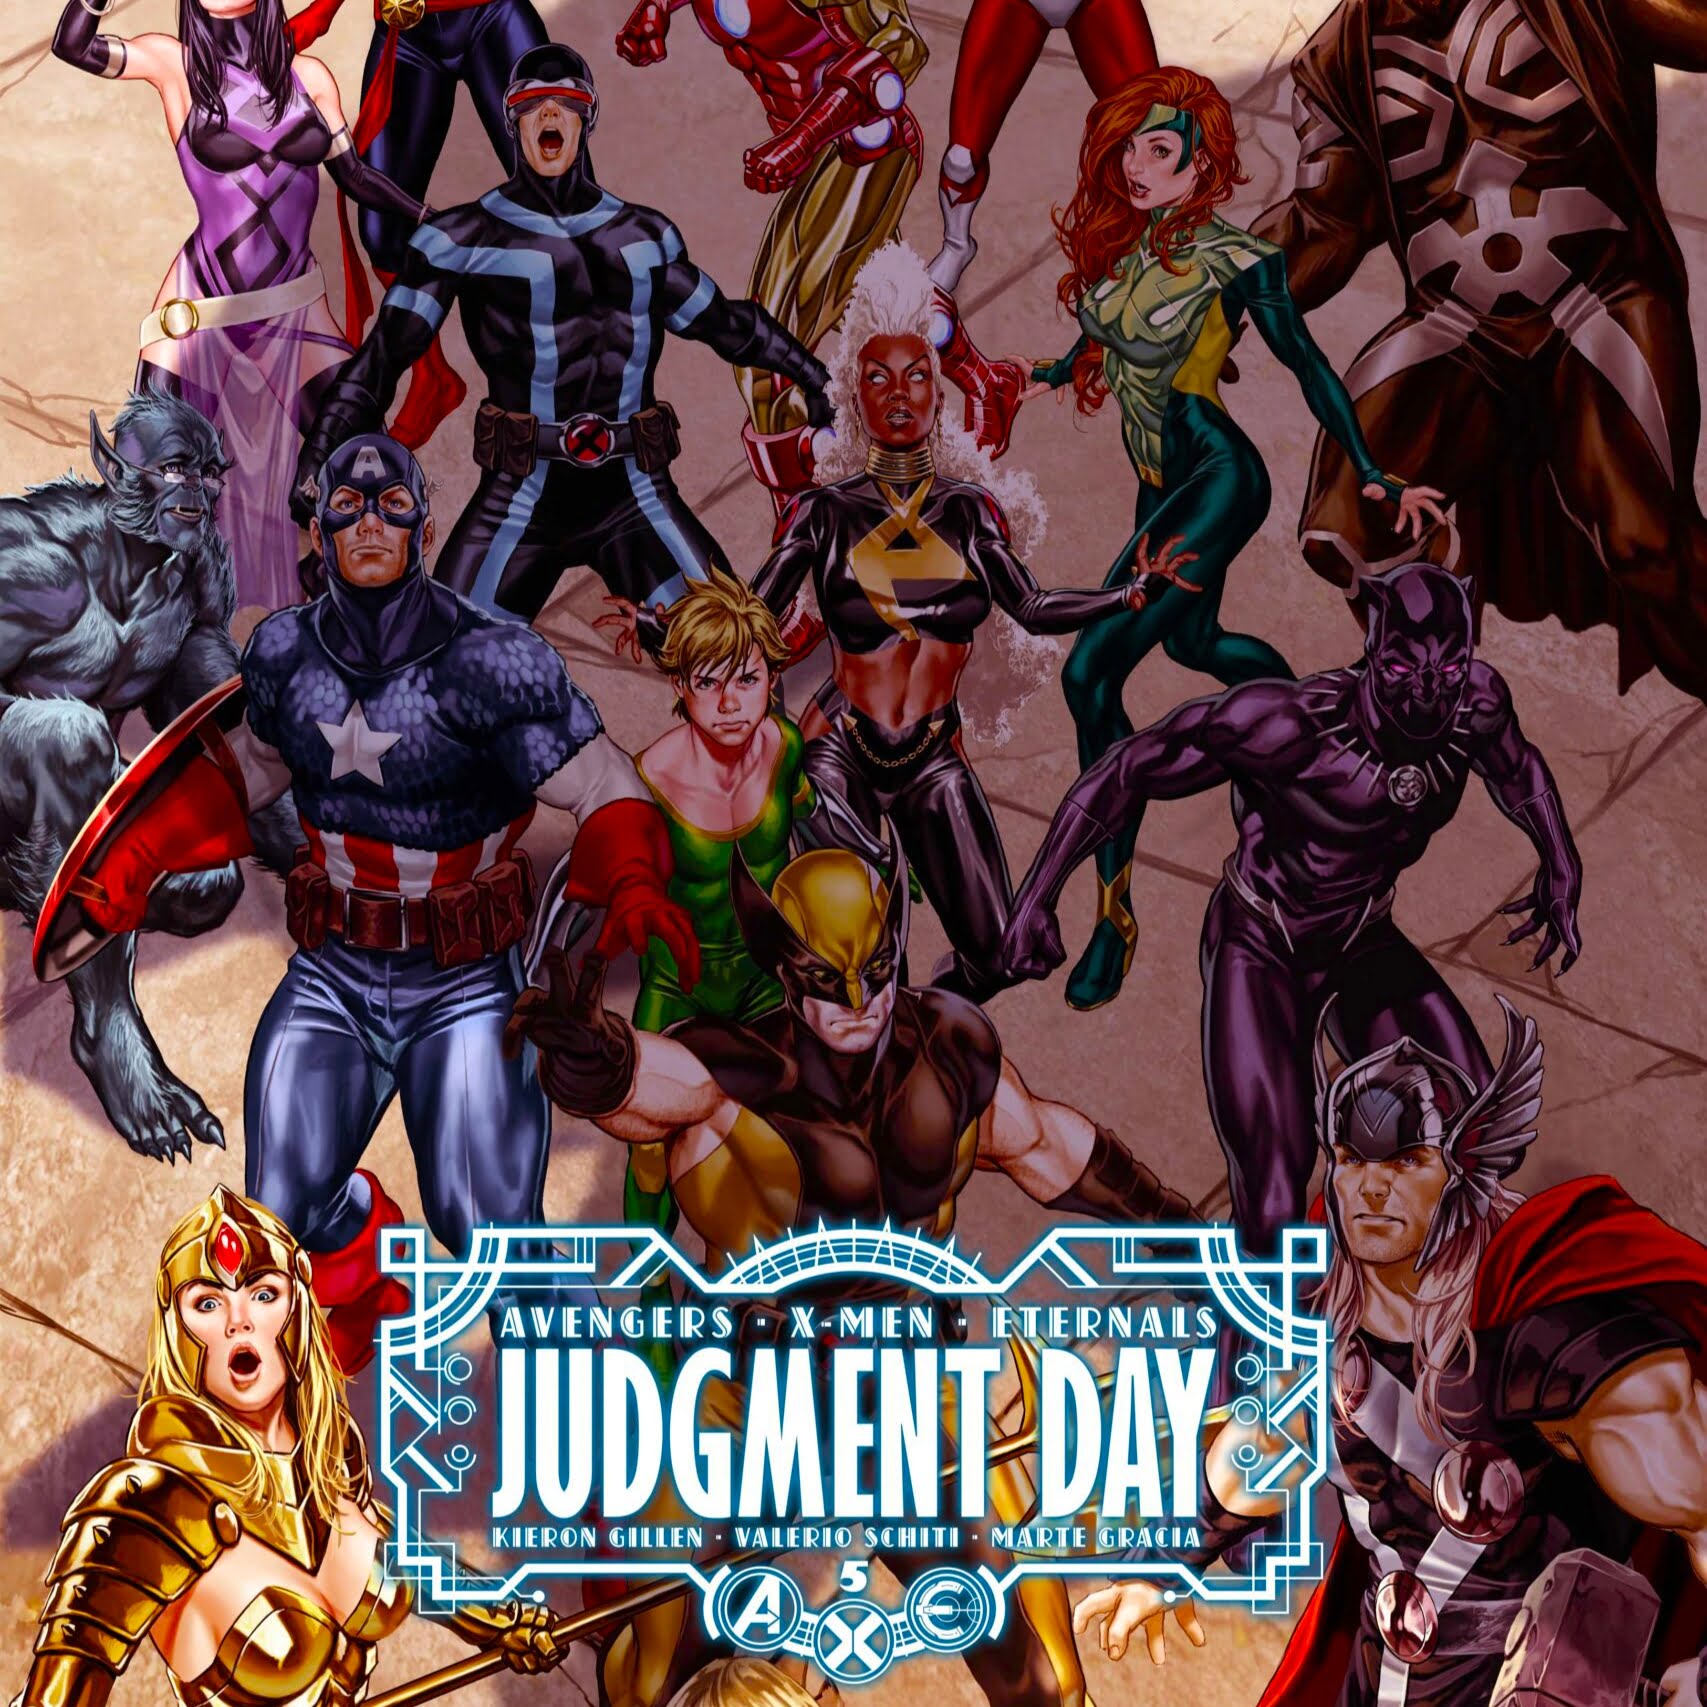 A.X.E.: JUDGEMENT DAY #5 cover art via Marvel Comics for use by 360 MAGAZINE